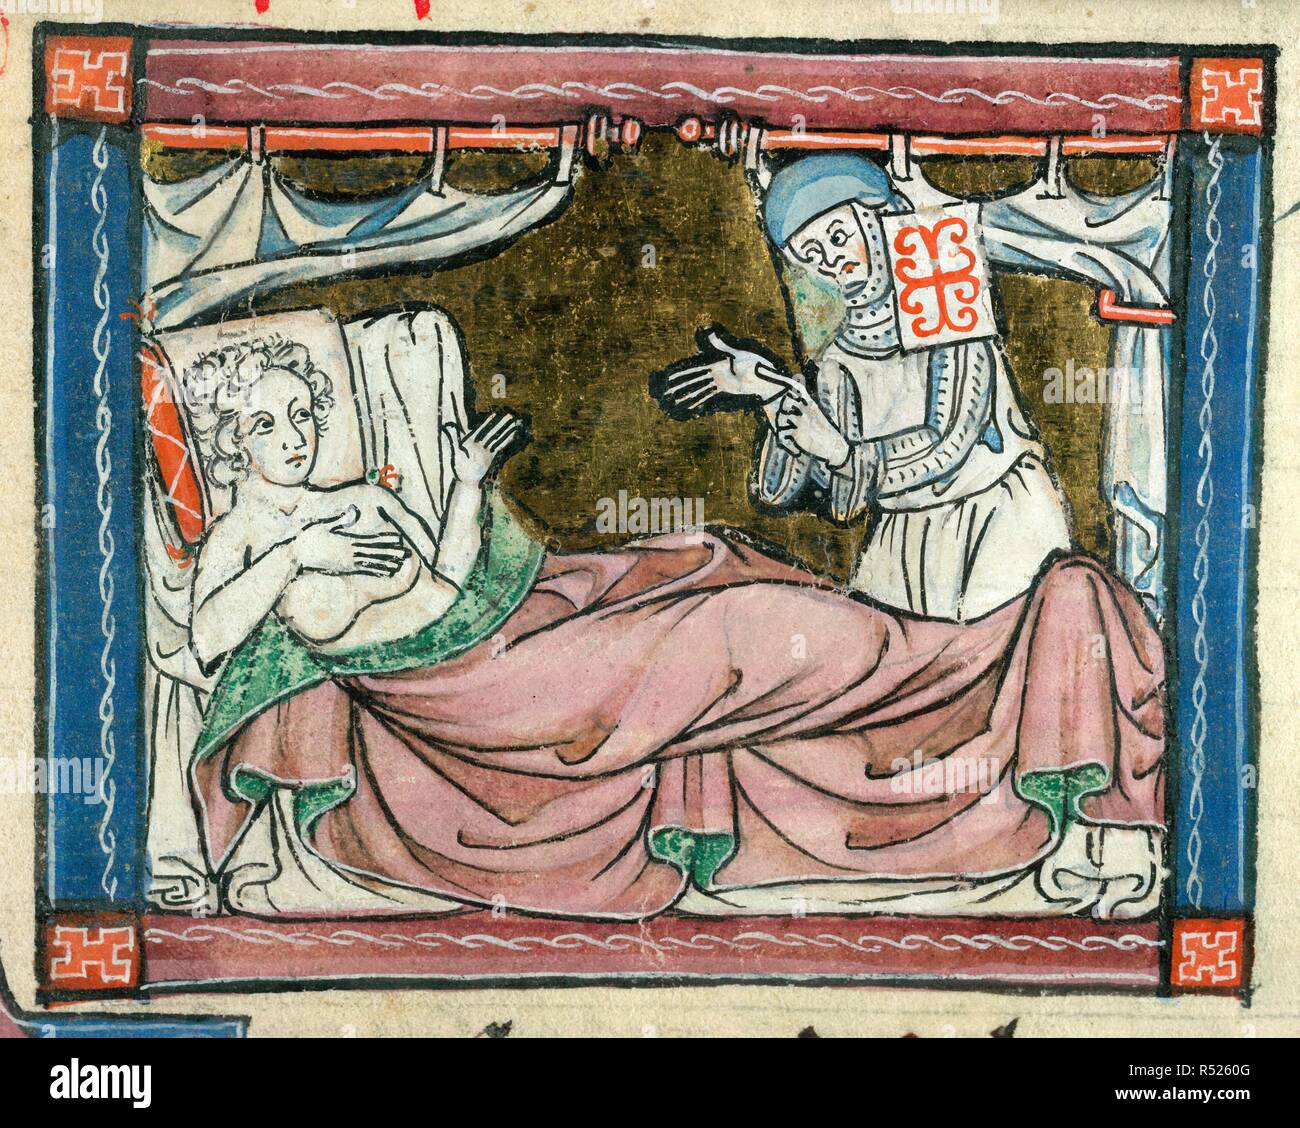 A woman in bed attended by a nun. L'Estoire del Saint Graal. France; circa 1316. Image taken from L'Estoire del Saint Graal. Source: Add. 10293, f.107. Stock Photo